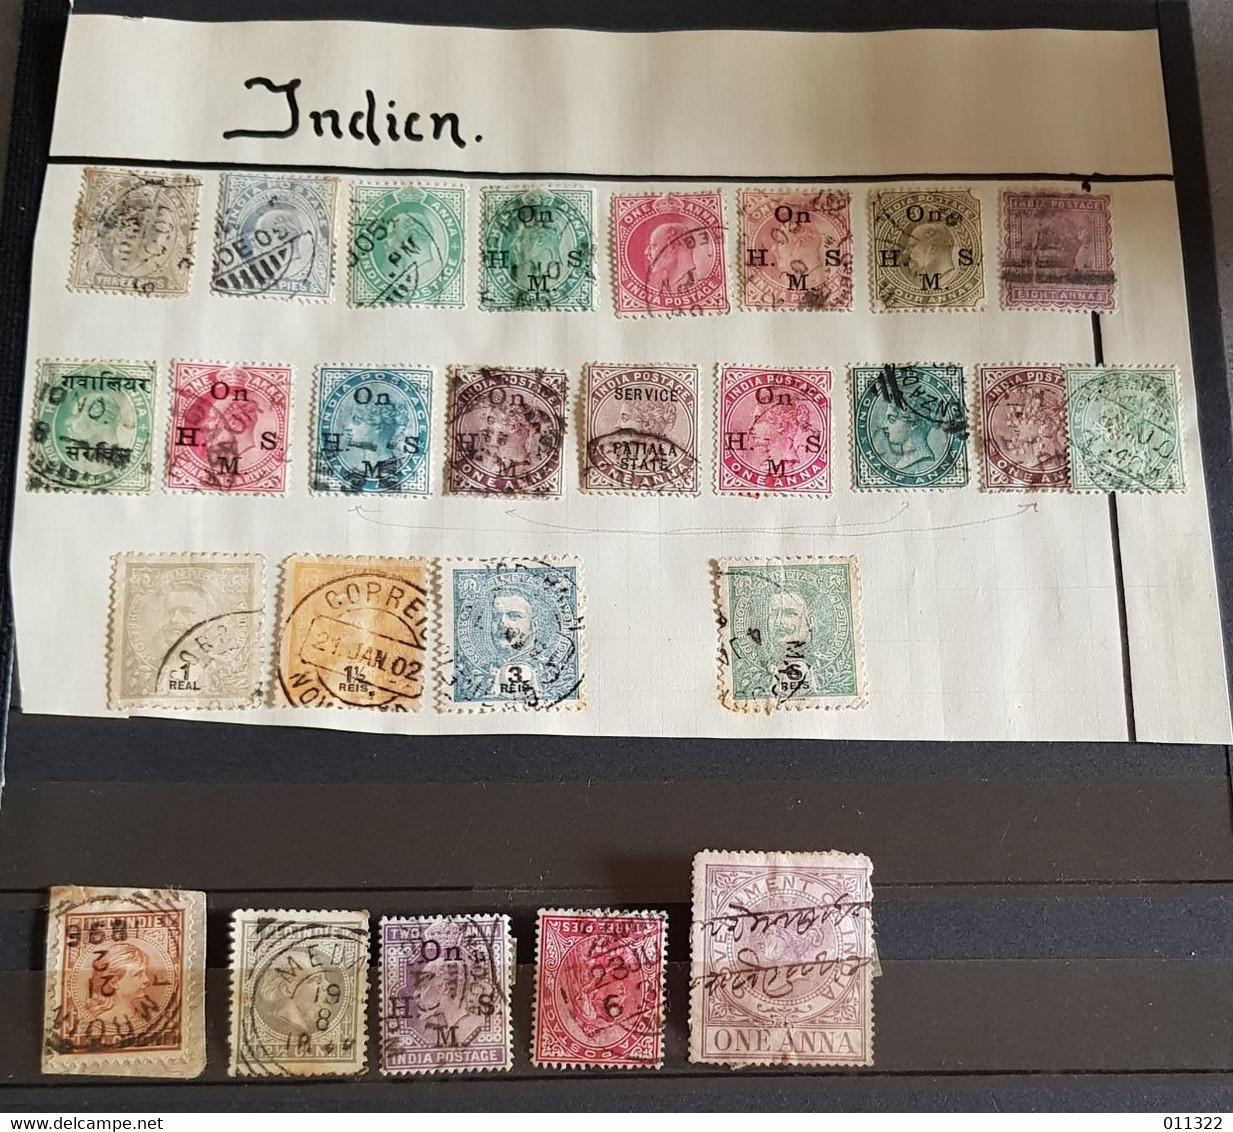 INDIA LOT STAMPS USED LOOK SCANN - Lots & Serien